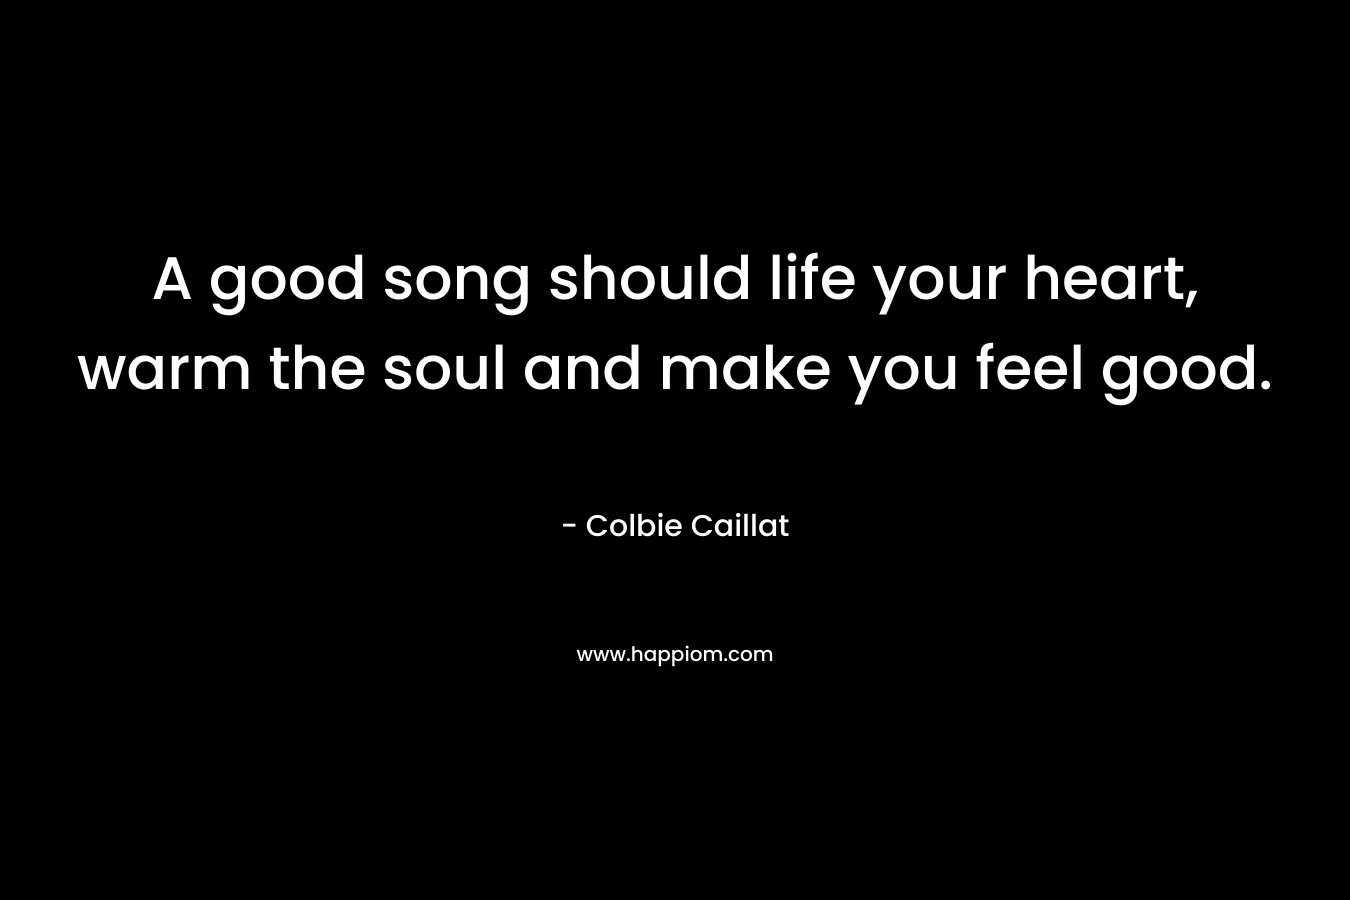 A good song should life your heart, warm the soul and make you feel good. – Colbie Caillat